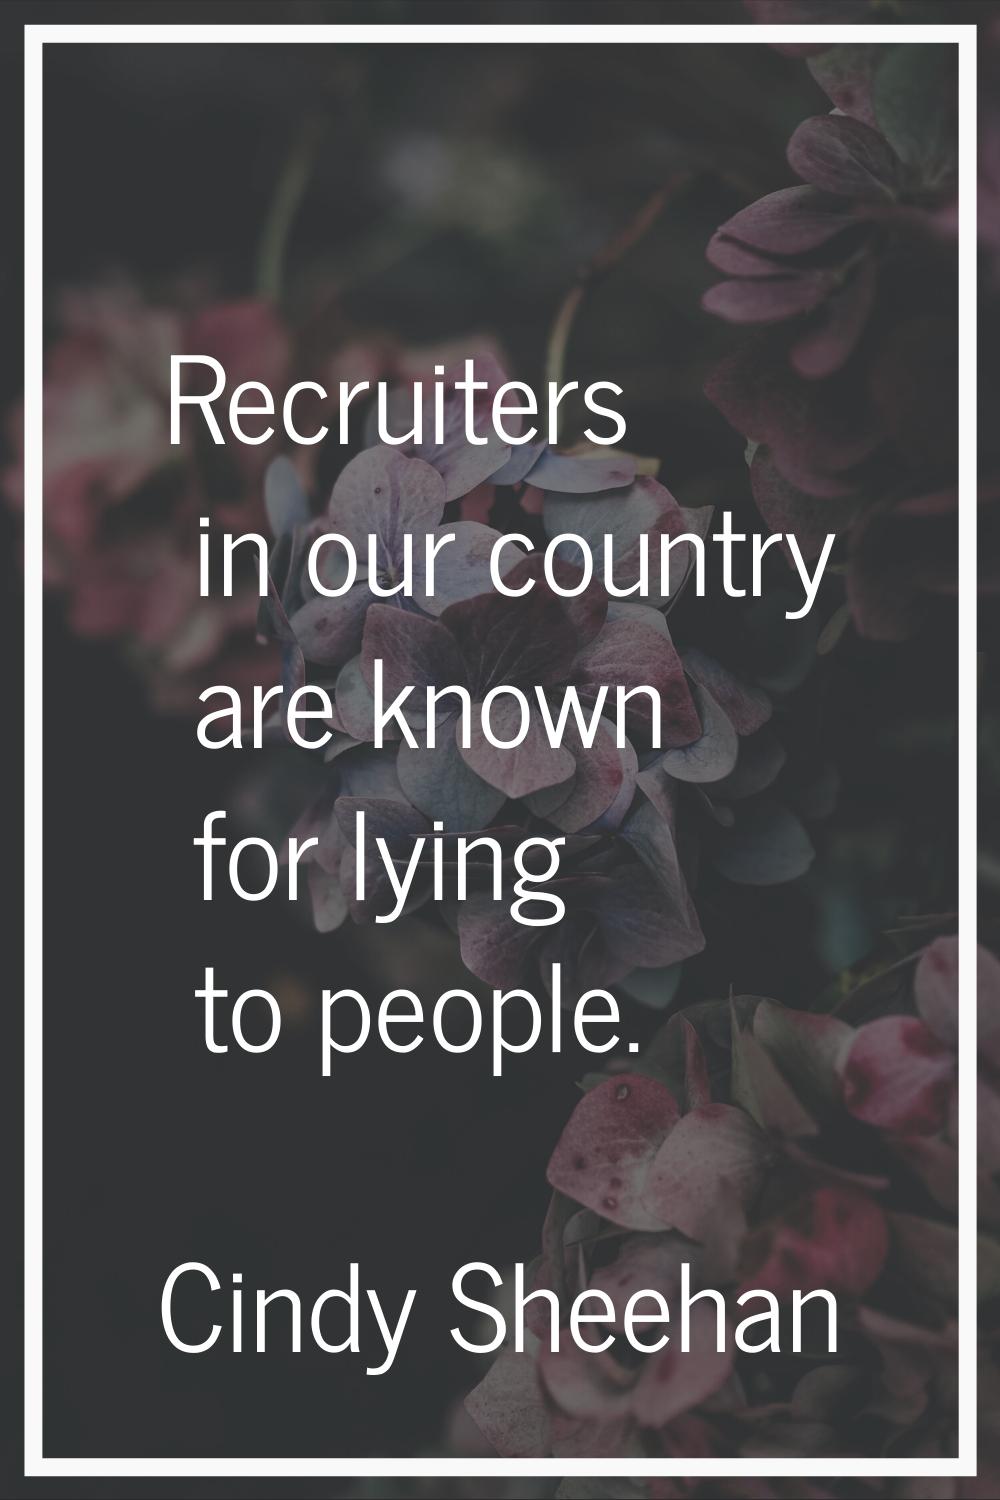 Recruiters in our country are known for lying to people.